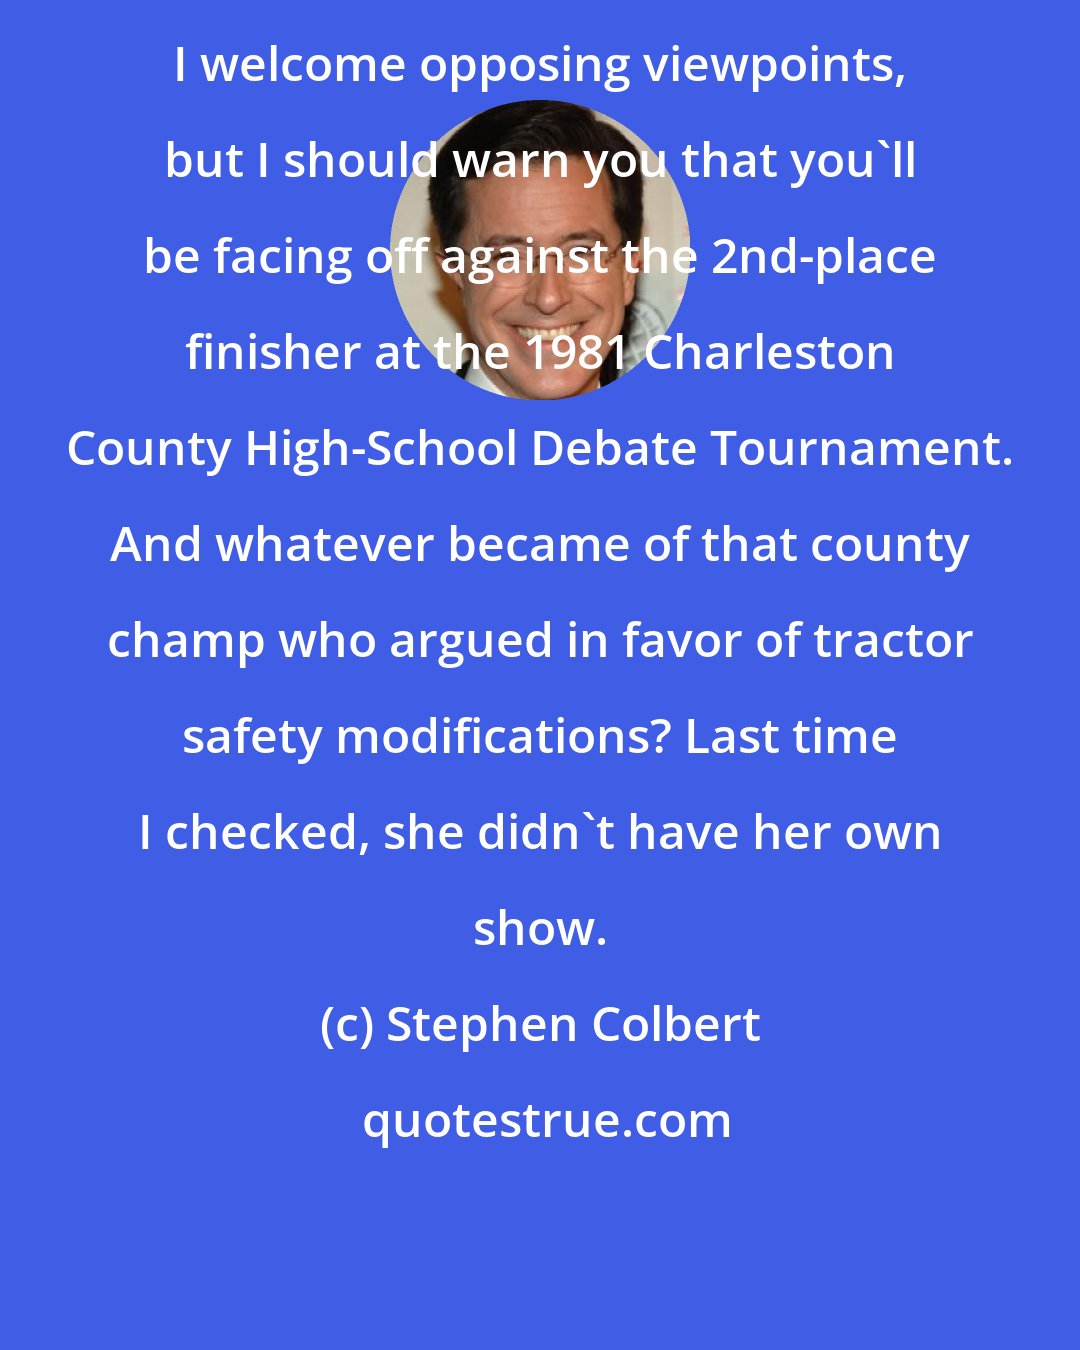 Stephen Colbert: I welcome opposing viewpoints, but I should warn you that you'll be facing off against the 2nd-place finisher at the 1981 Charleston County High-School Debate Tournament. And whatever became of that county champ who argued in favor of tractor safety modifications? Last time I checked, she didn't have her own show.